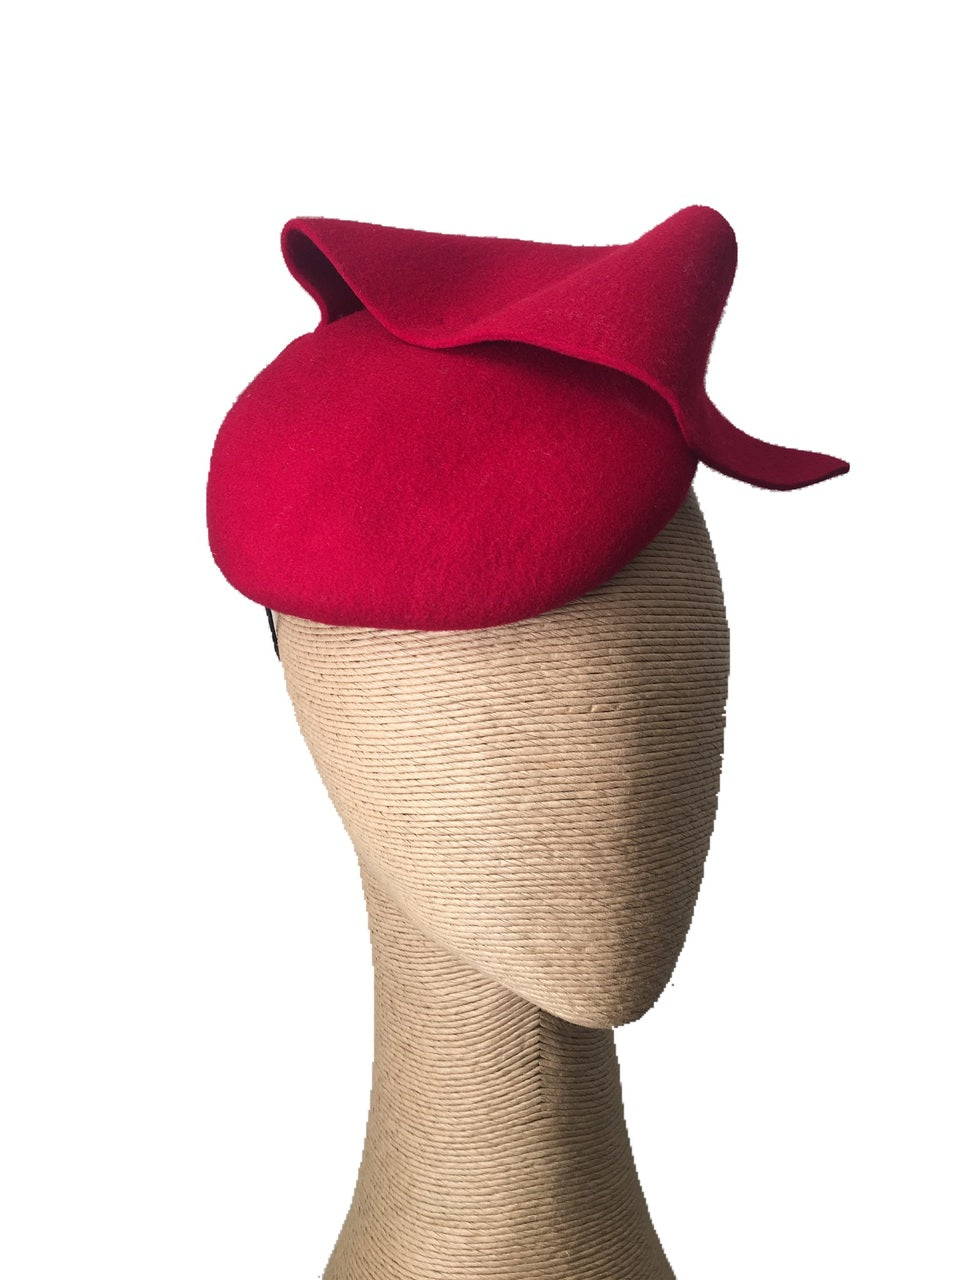 Max Alexander Red Felt Hat with a Wave